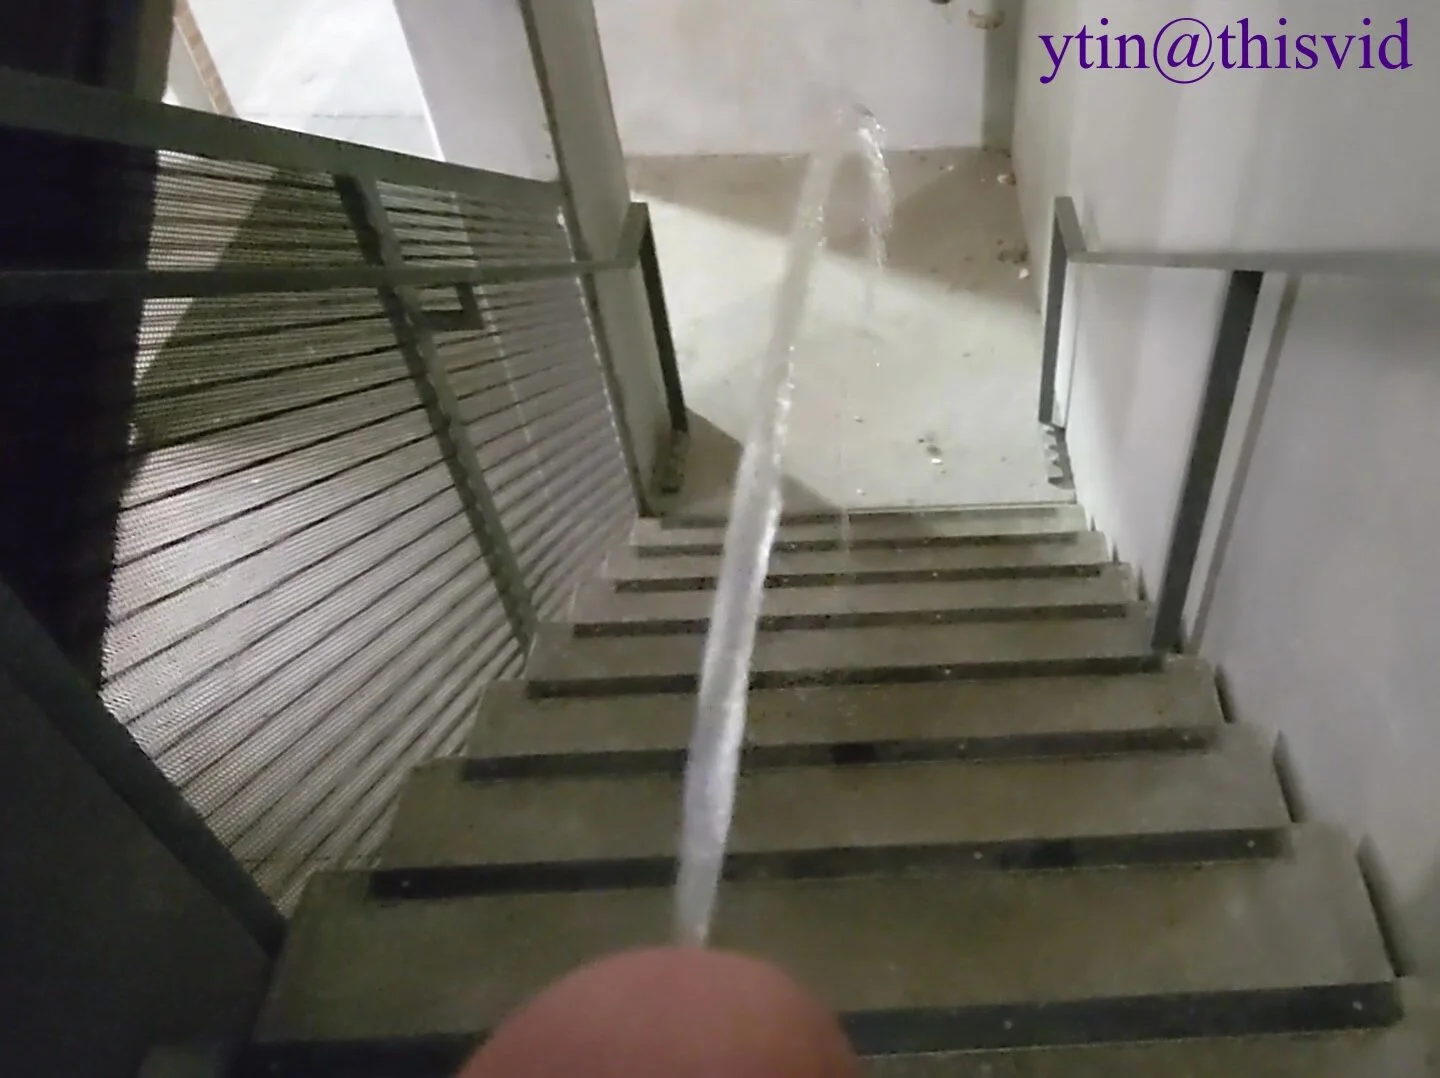 Public Parking Garage Stairs Piss pic